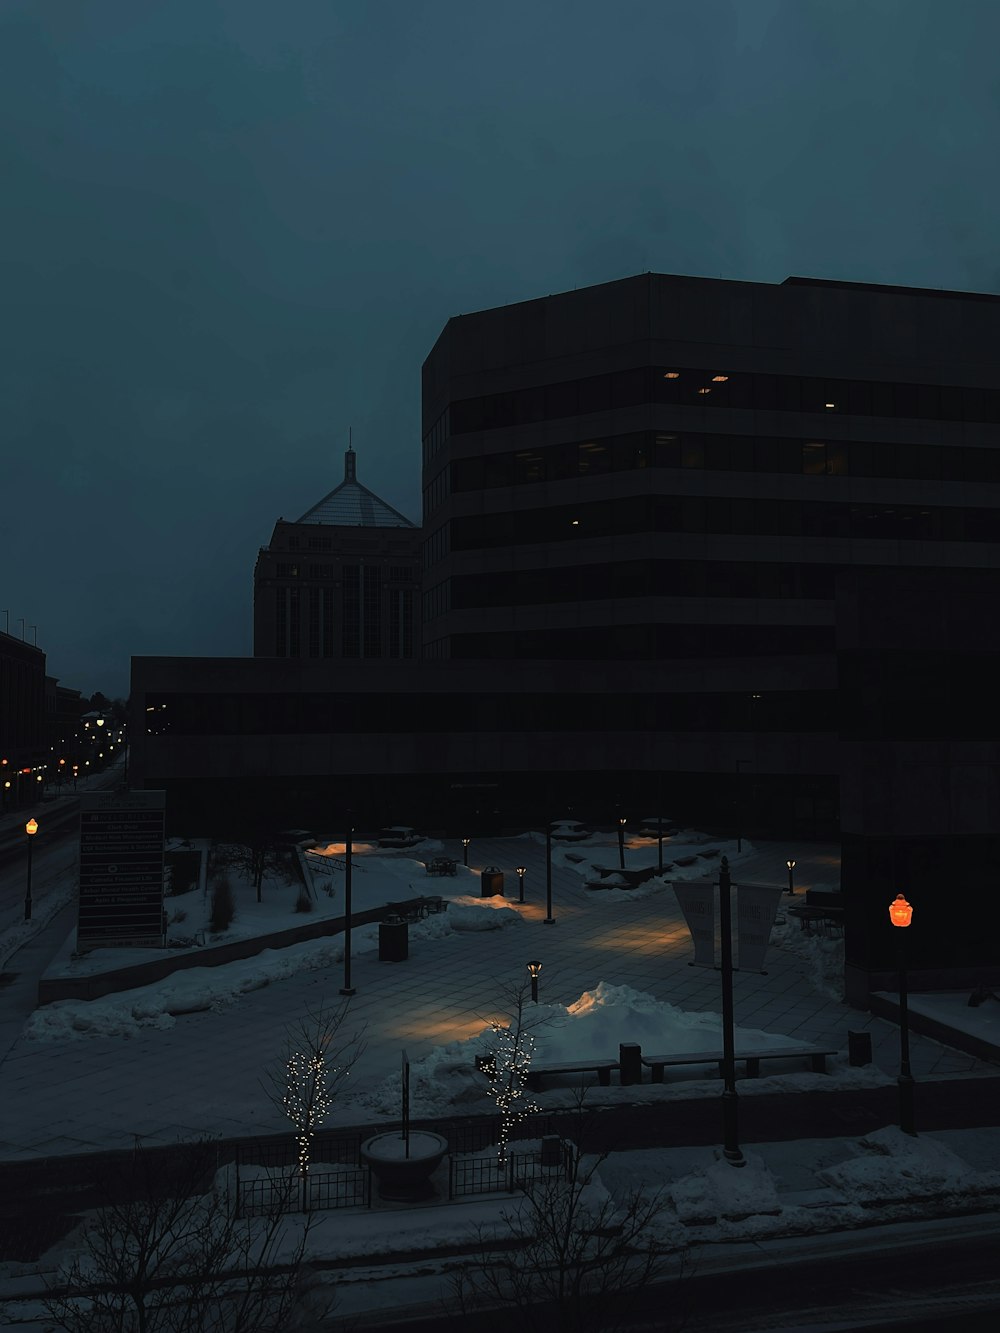 a building is lit up at night in the snow